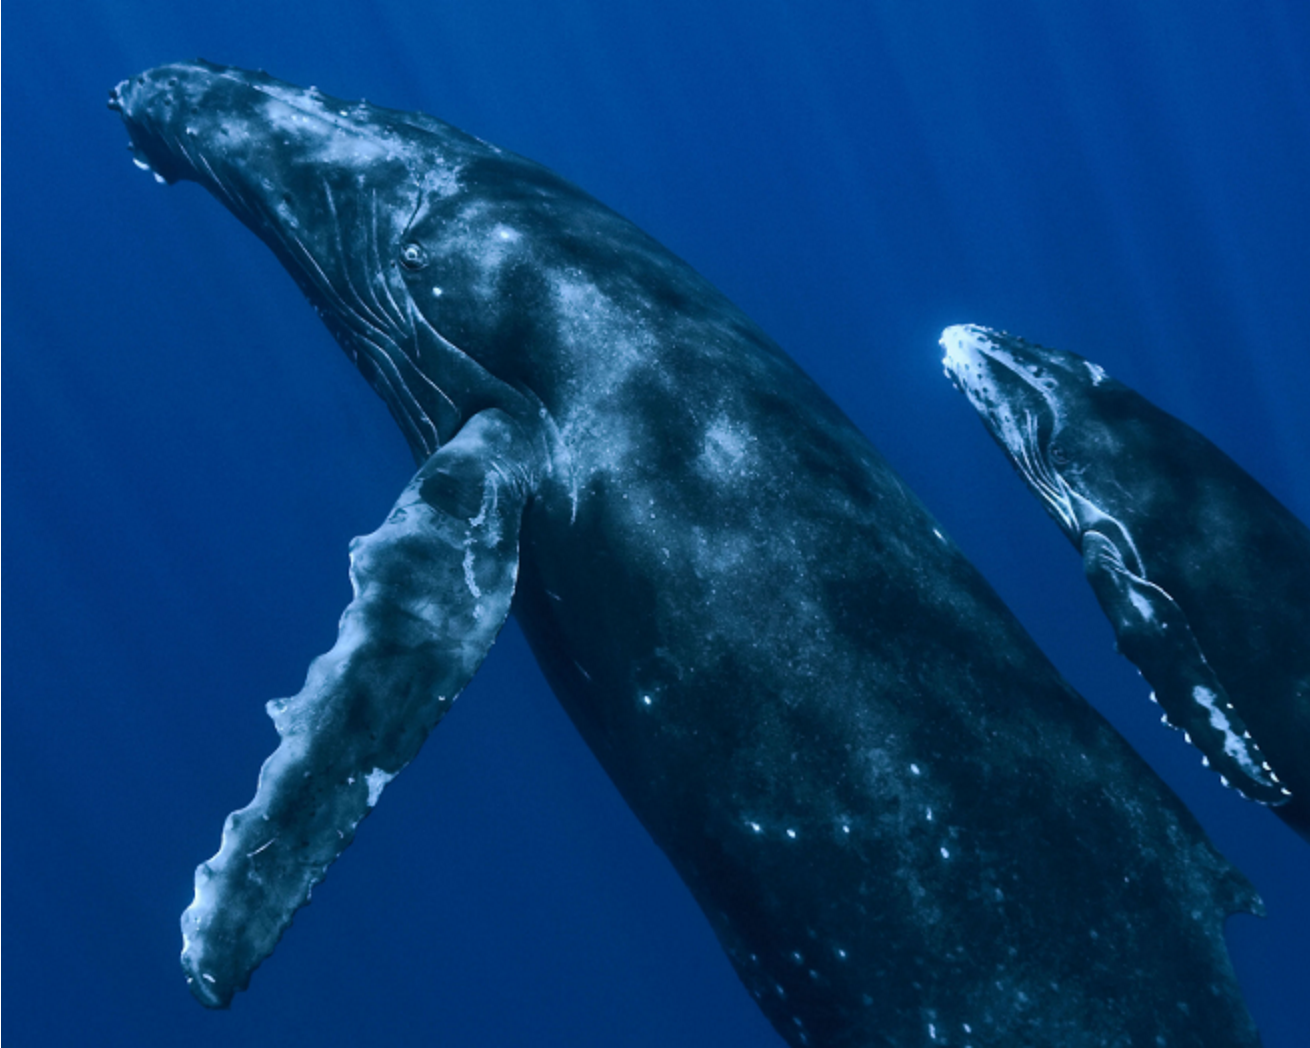 A photo of two blue whales swimming next to each other.